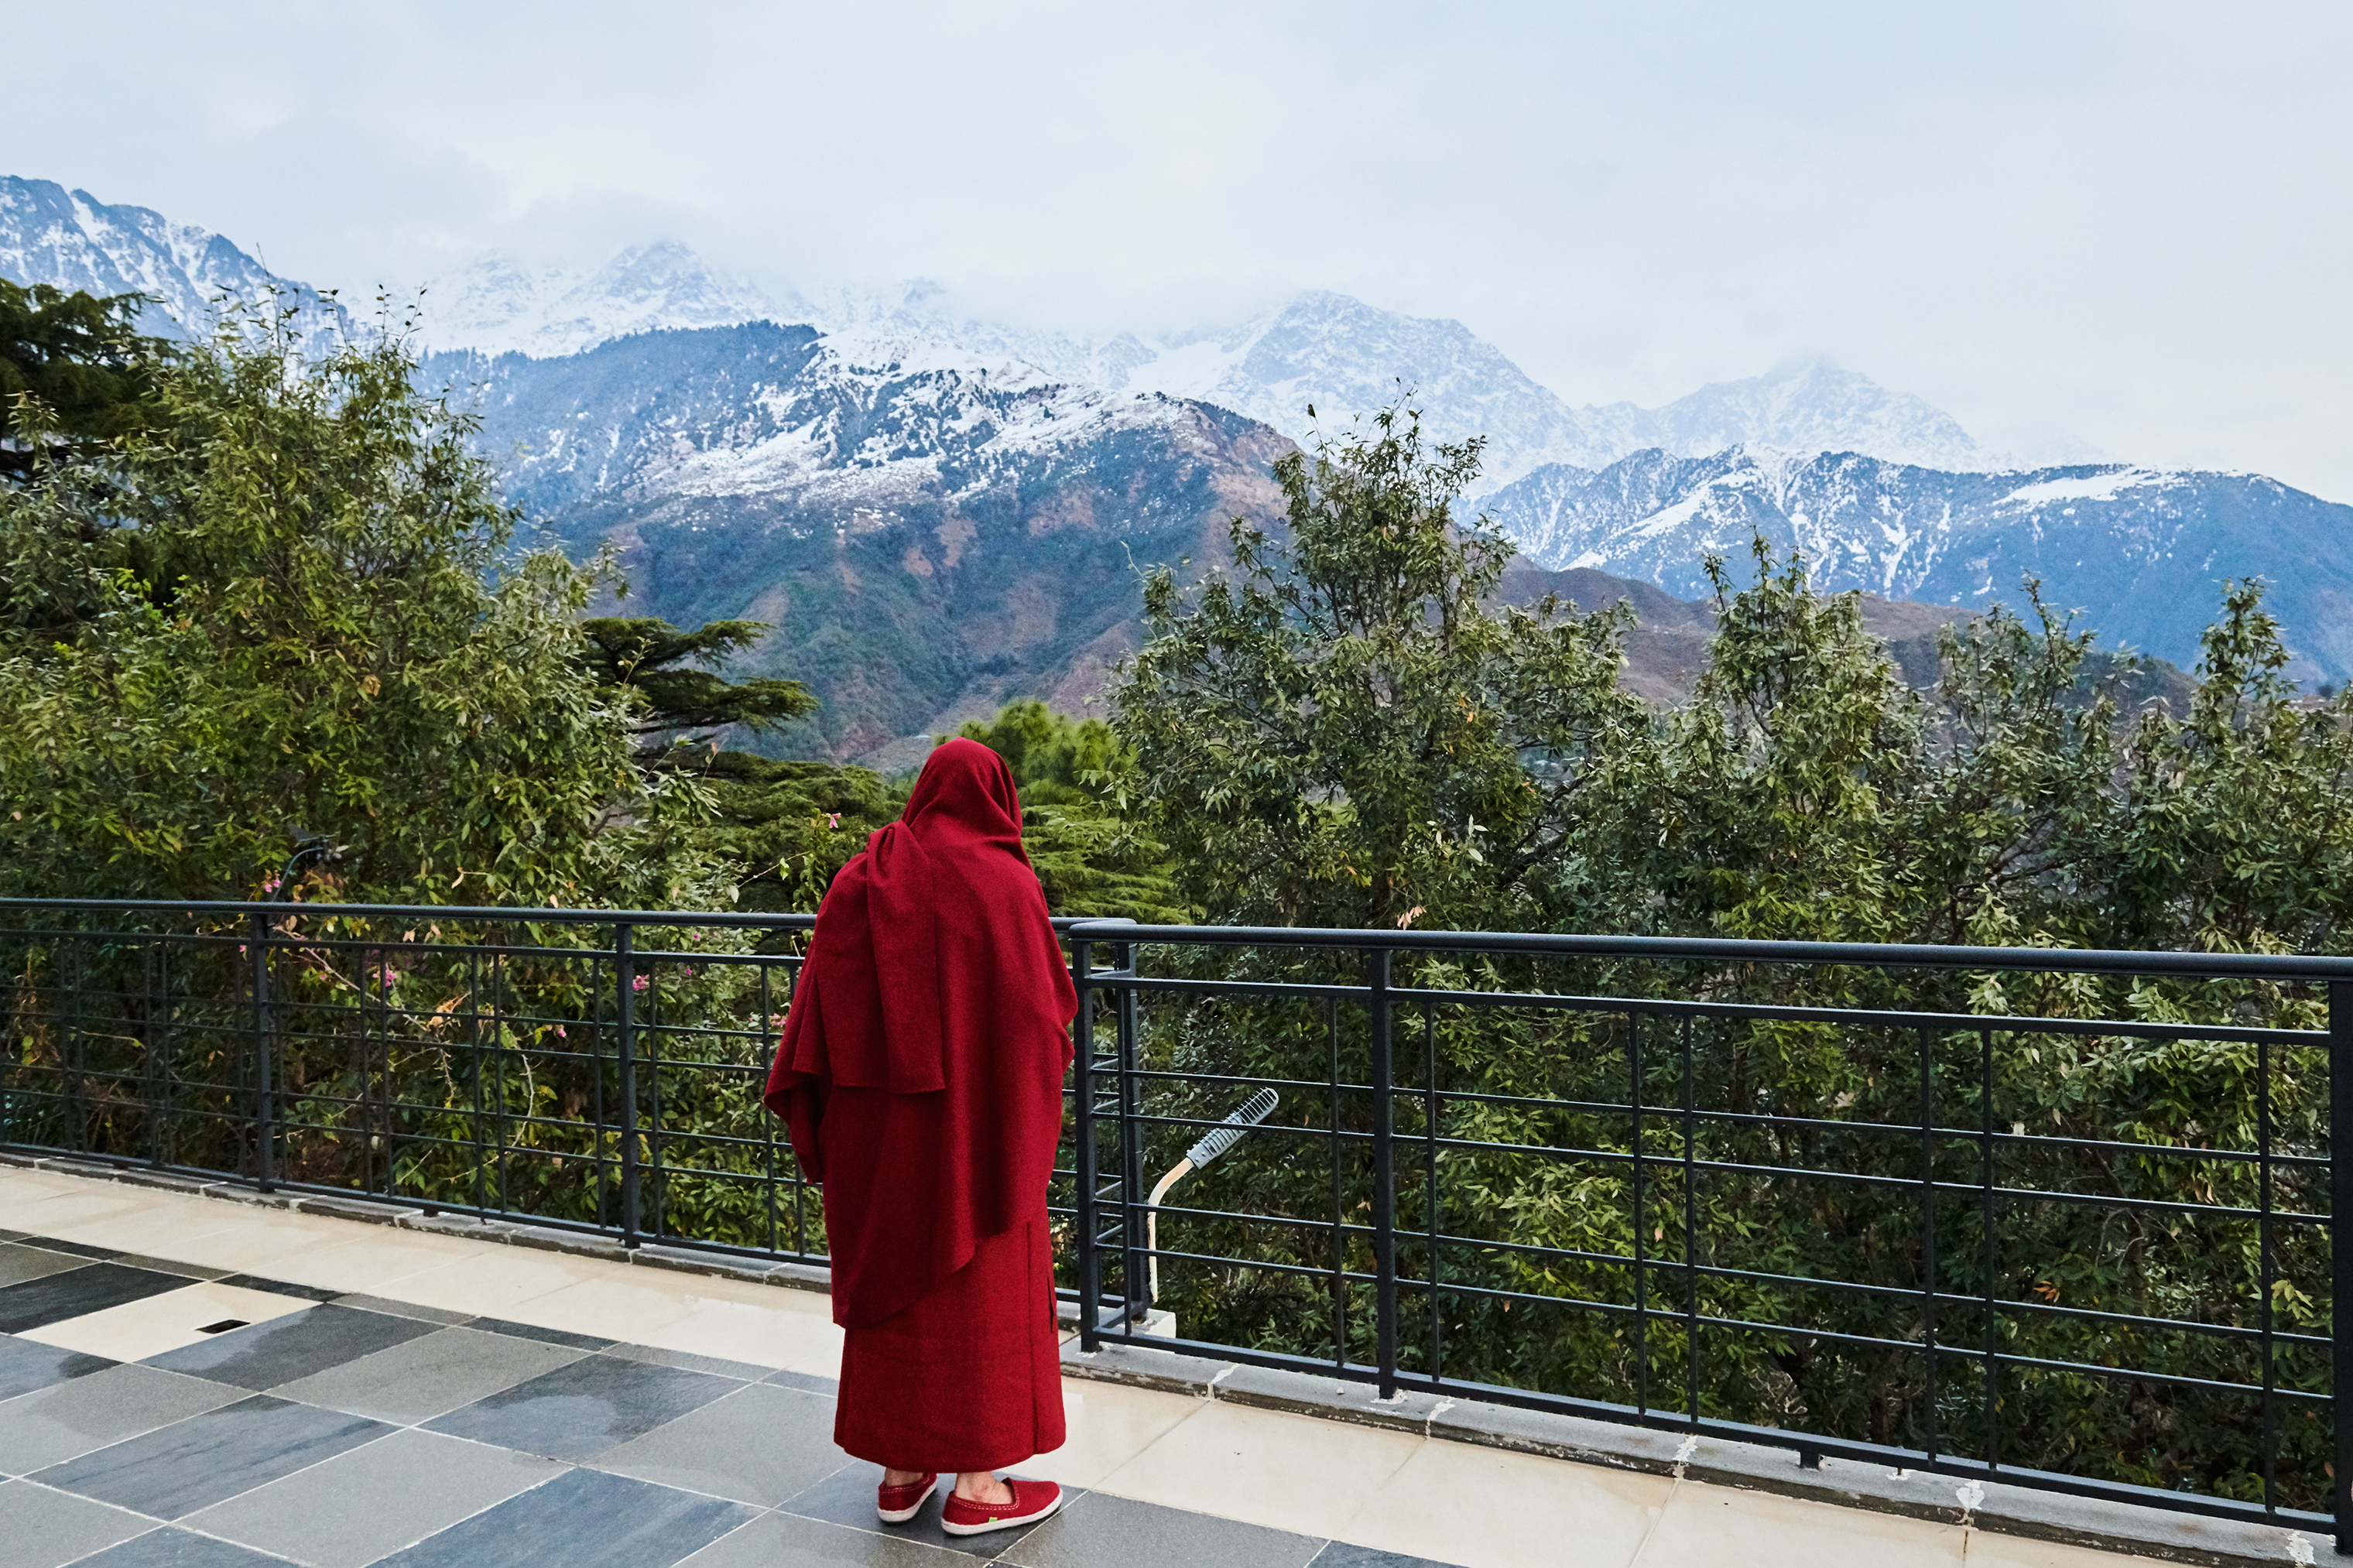 Six decades on, the Dalai Lama still hopes he will visit his birthplace again. (Ruven Afanador for TIME)